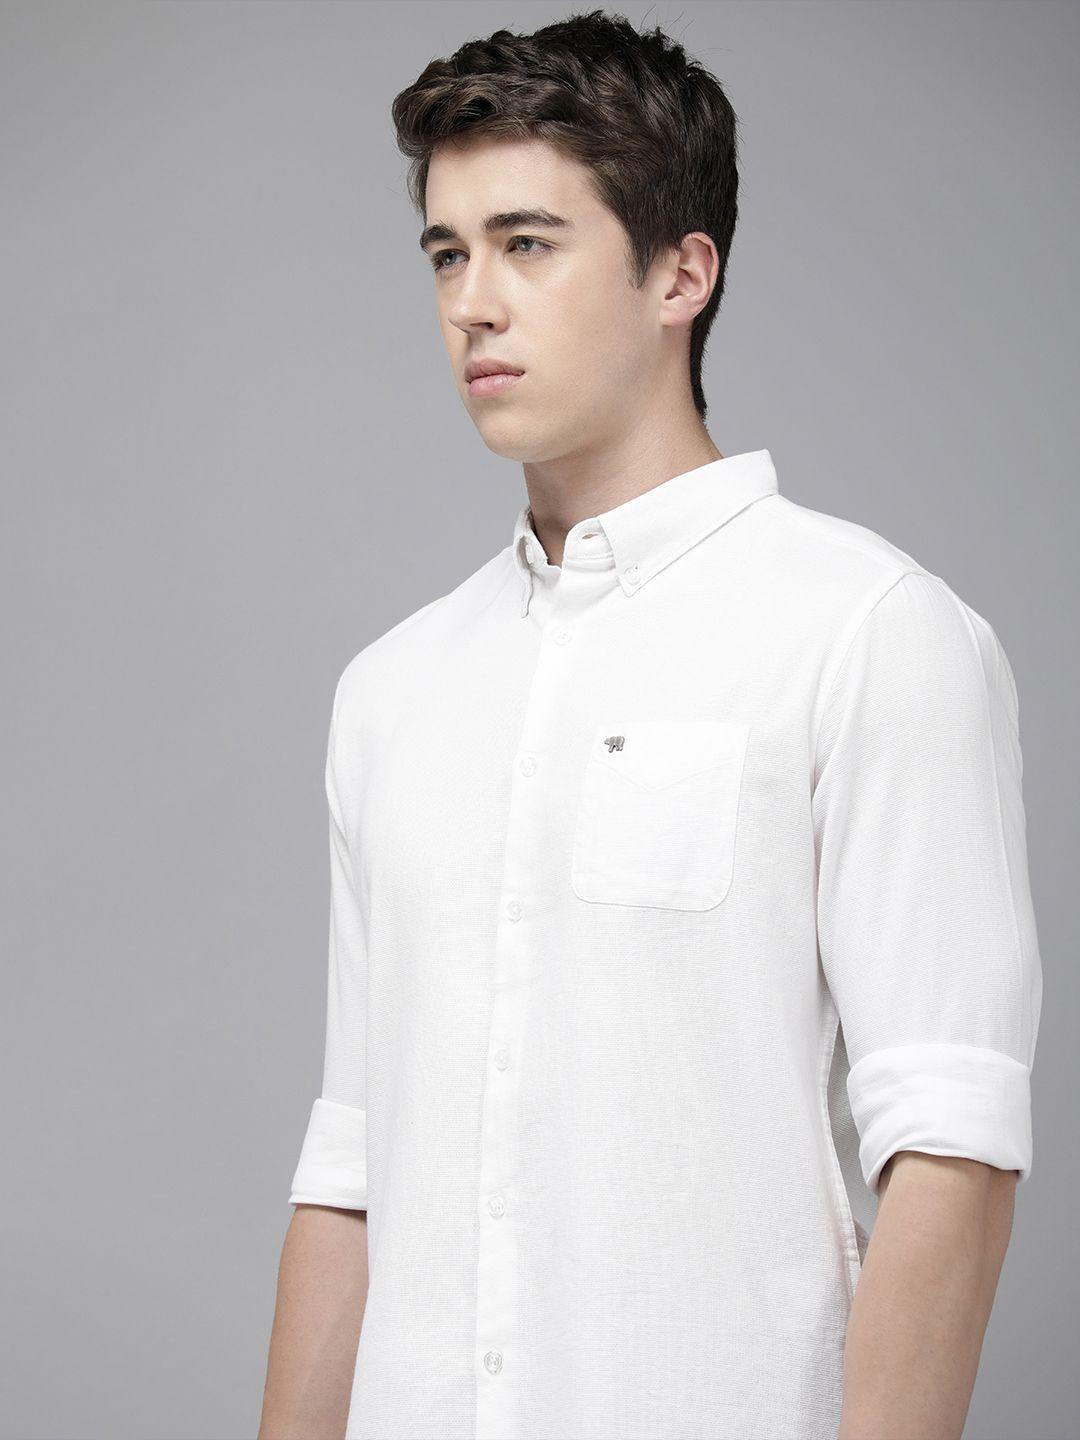 the-bear-house-men-slim-fit-opaque-pure-cotton-casual-shirt